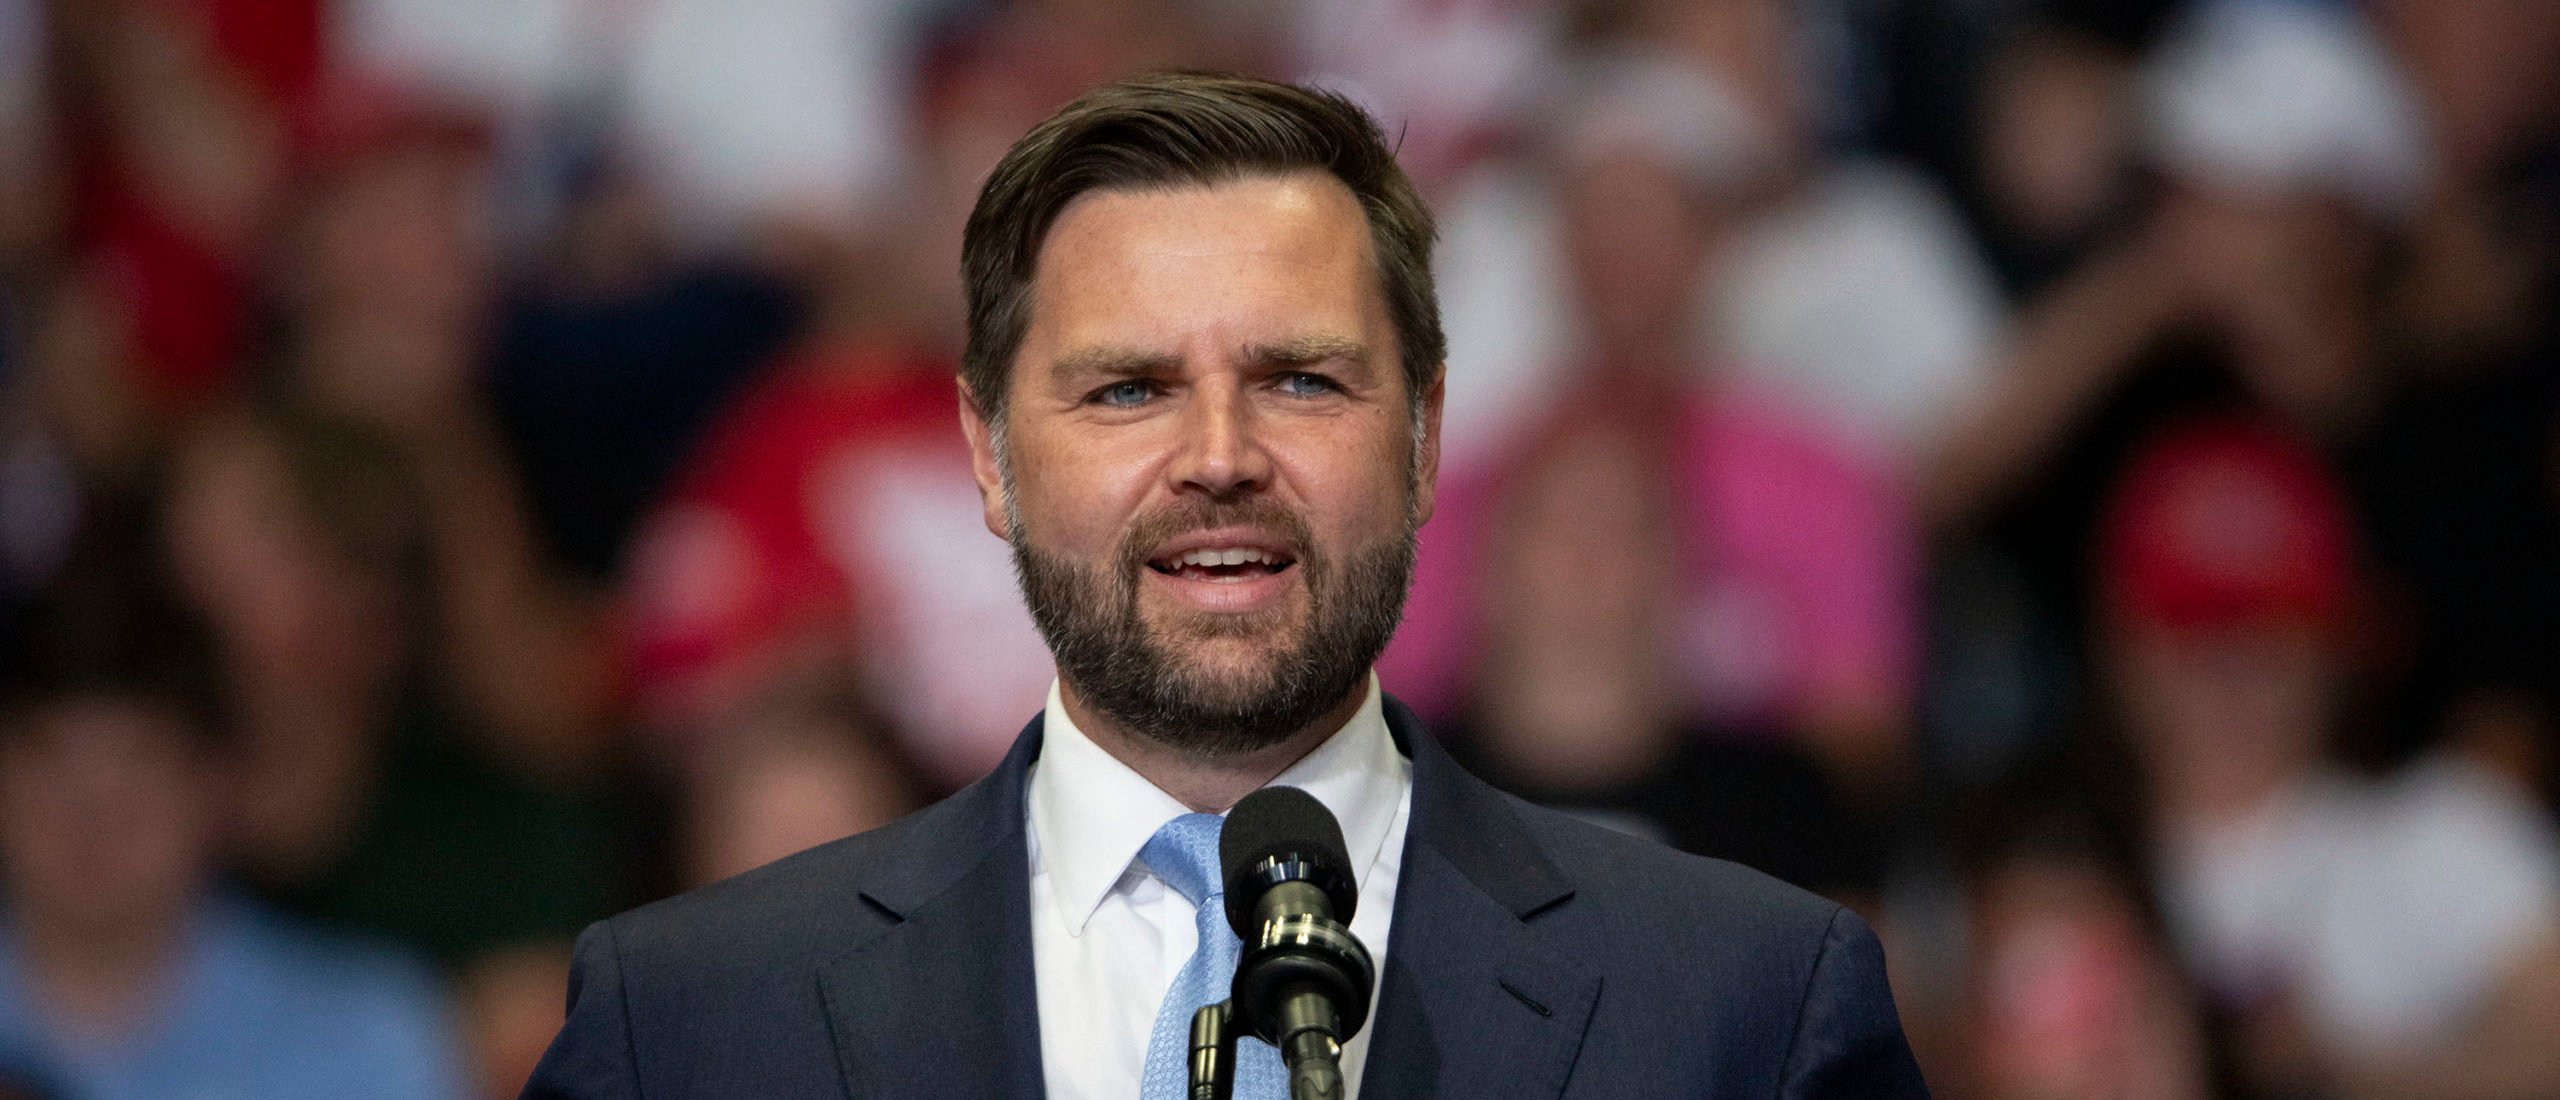 GRAND RAPIDS, MICHIGAN - JULY 20: Republican Vice Presidential nominee U.S. Senator J.D. Vance (R-OH) speaks at the first public rally held with his running mate, Republican Presidential nominee former President Donald J. Trump (not pictured), at the Van Andel Arena on July 20, 2024 in Grand Rapids, Michigan. This is also the former President's first public rally since he was shot in the ear during an assassination attempt in Pennsylvania on July 13. Photo by Bill Pugliano/Getty ImGRAND RAPIDS, MICHIGAN - JULY 20: Republican Vice Presidential nominee U.S. Senator J.D. Vance (R-OH) speaks at the first public rally held with his running mate, Republican Presidential nominee former President Donald J. Trump (not pictured), at the Van Andel Arena on July 20, 2024 in Grand Rapids, Michigan. This is also the former President's first public rally since he was shot in the ear during an assassination attempt in Pennsylvania on July 13. Photo by Bill Pugliano/GGRAND RAPIDS, MICHIGAN - JULY 20: Republican Vice Presidential nominee U.S. Senator J.D. Vance (R-OH) speaks at the first public rally held with his running mate, Republican Presidential nominee former President Donald J. Trump (not pictured), at the Van Andel Arena on July 20, 2024 in Grand Rapids, Michigan. This is also the former President's first public rally since he was shot in the ear during an assassination attempt in Pennsylvania on July 13. Photo by Bill Pugliano/Getty Images)etty Images)ages)